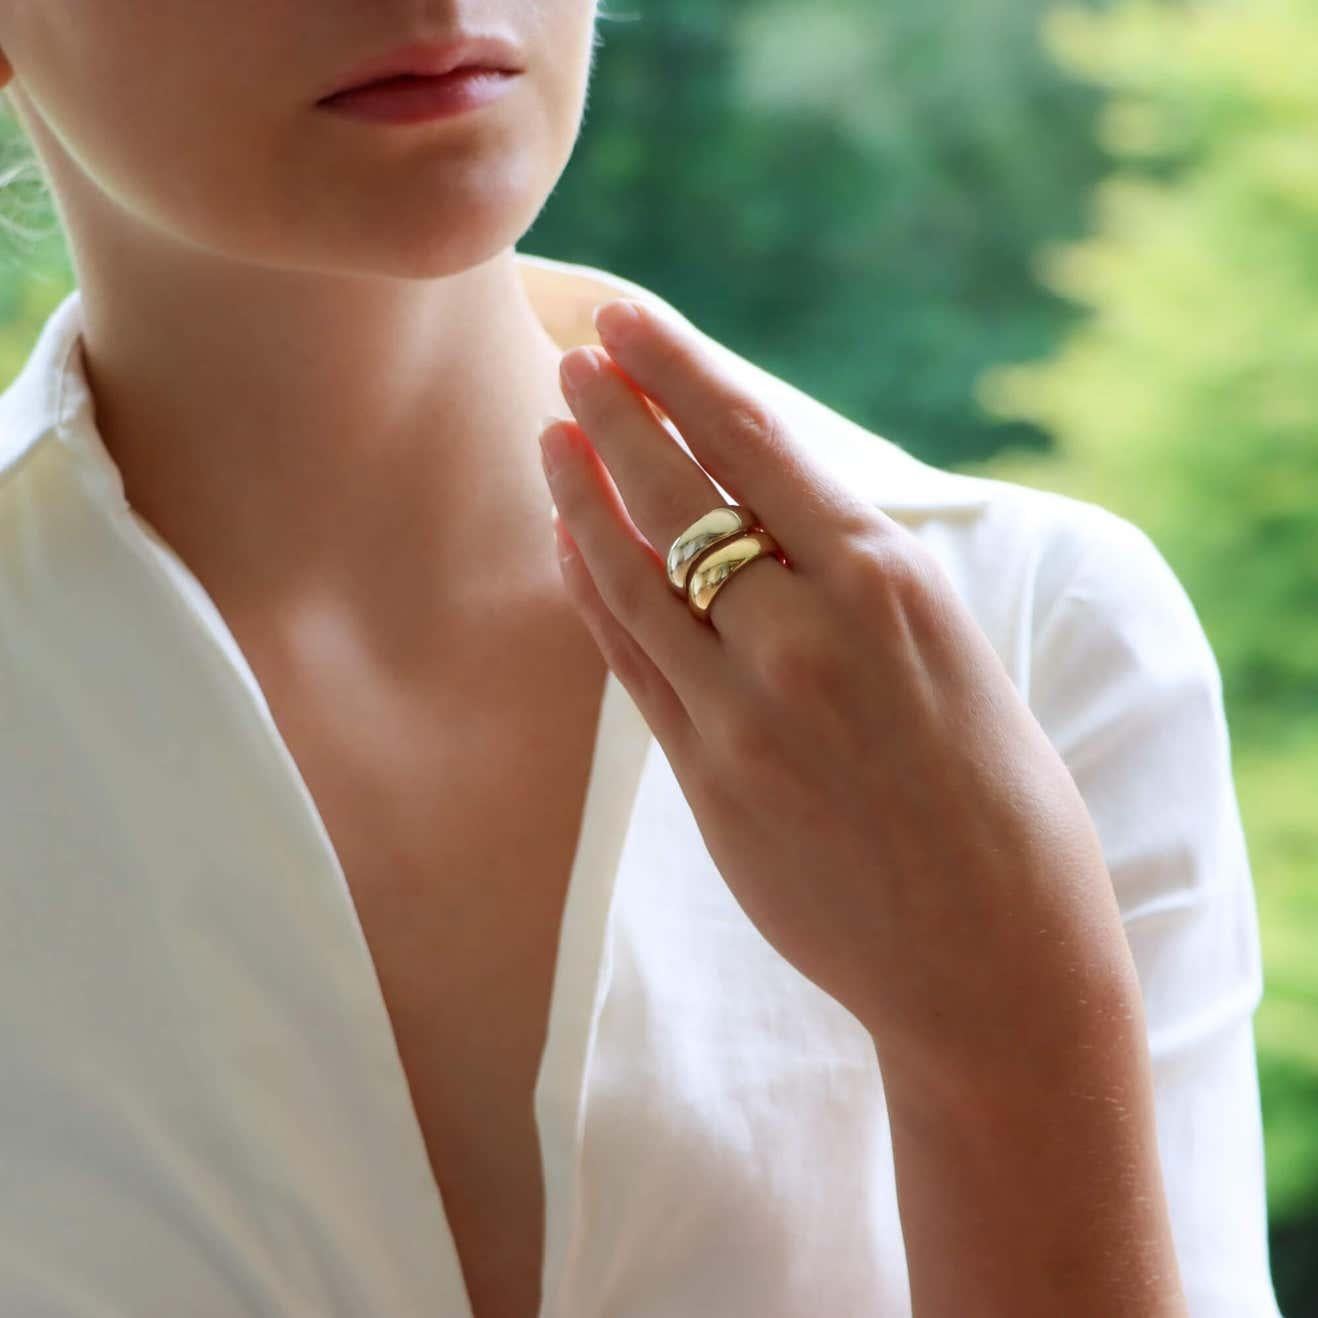 The ring is composed of two bands carved to perfectly fit together. The ring can easily be worn for every day as a standalone piece, or alternatively, stacked up amongst other pieces.

Brand: Cartier
Metal: 18K White & Yellow Gold
Ring Size: 6 US
It